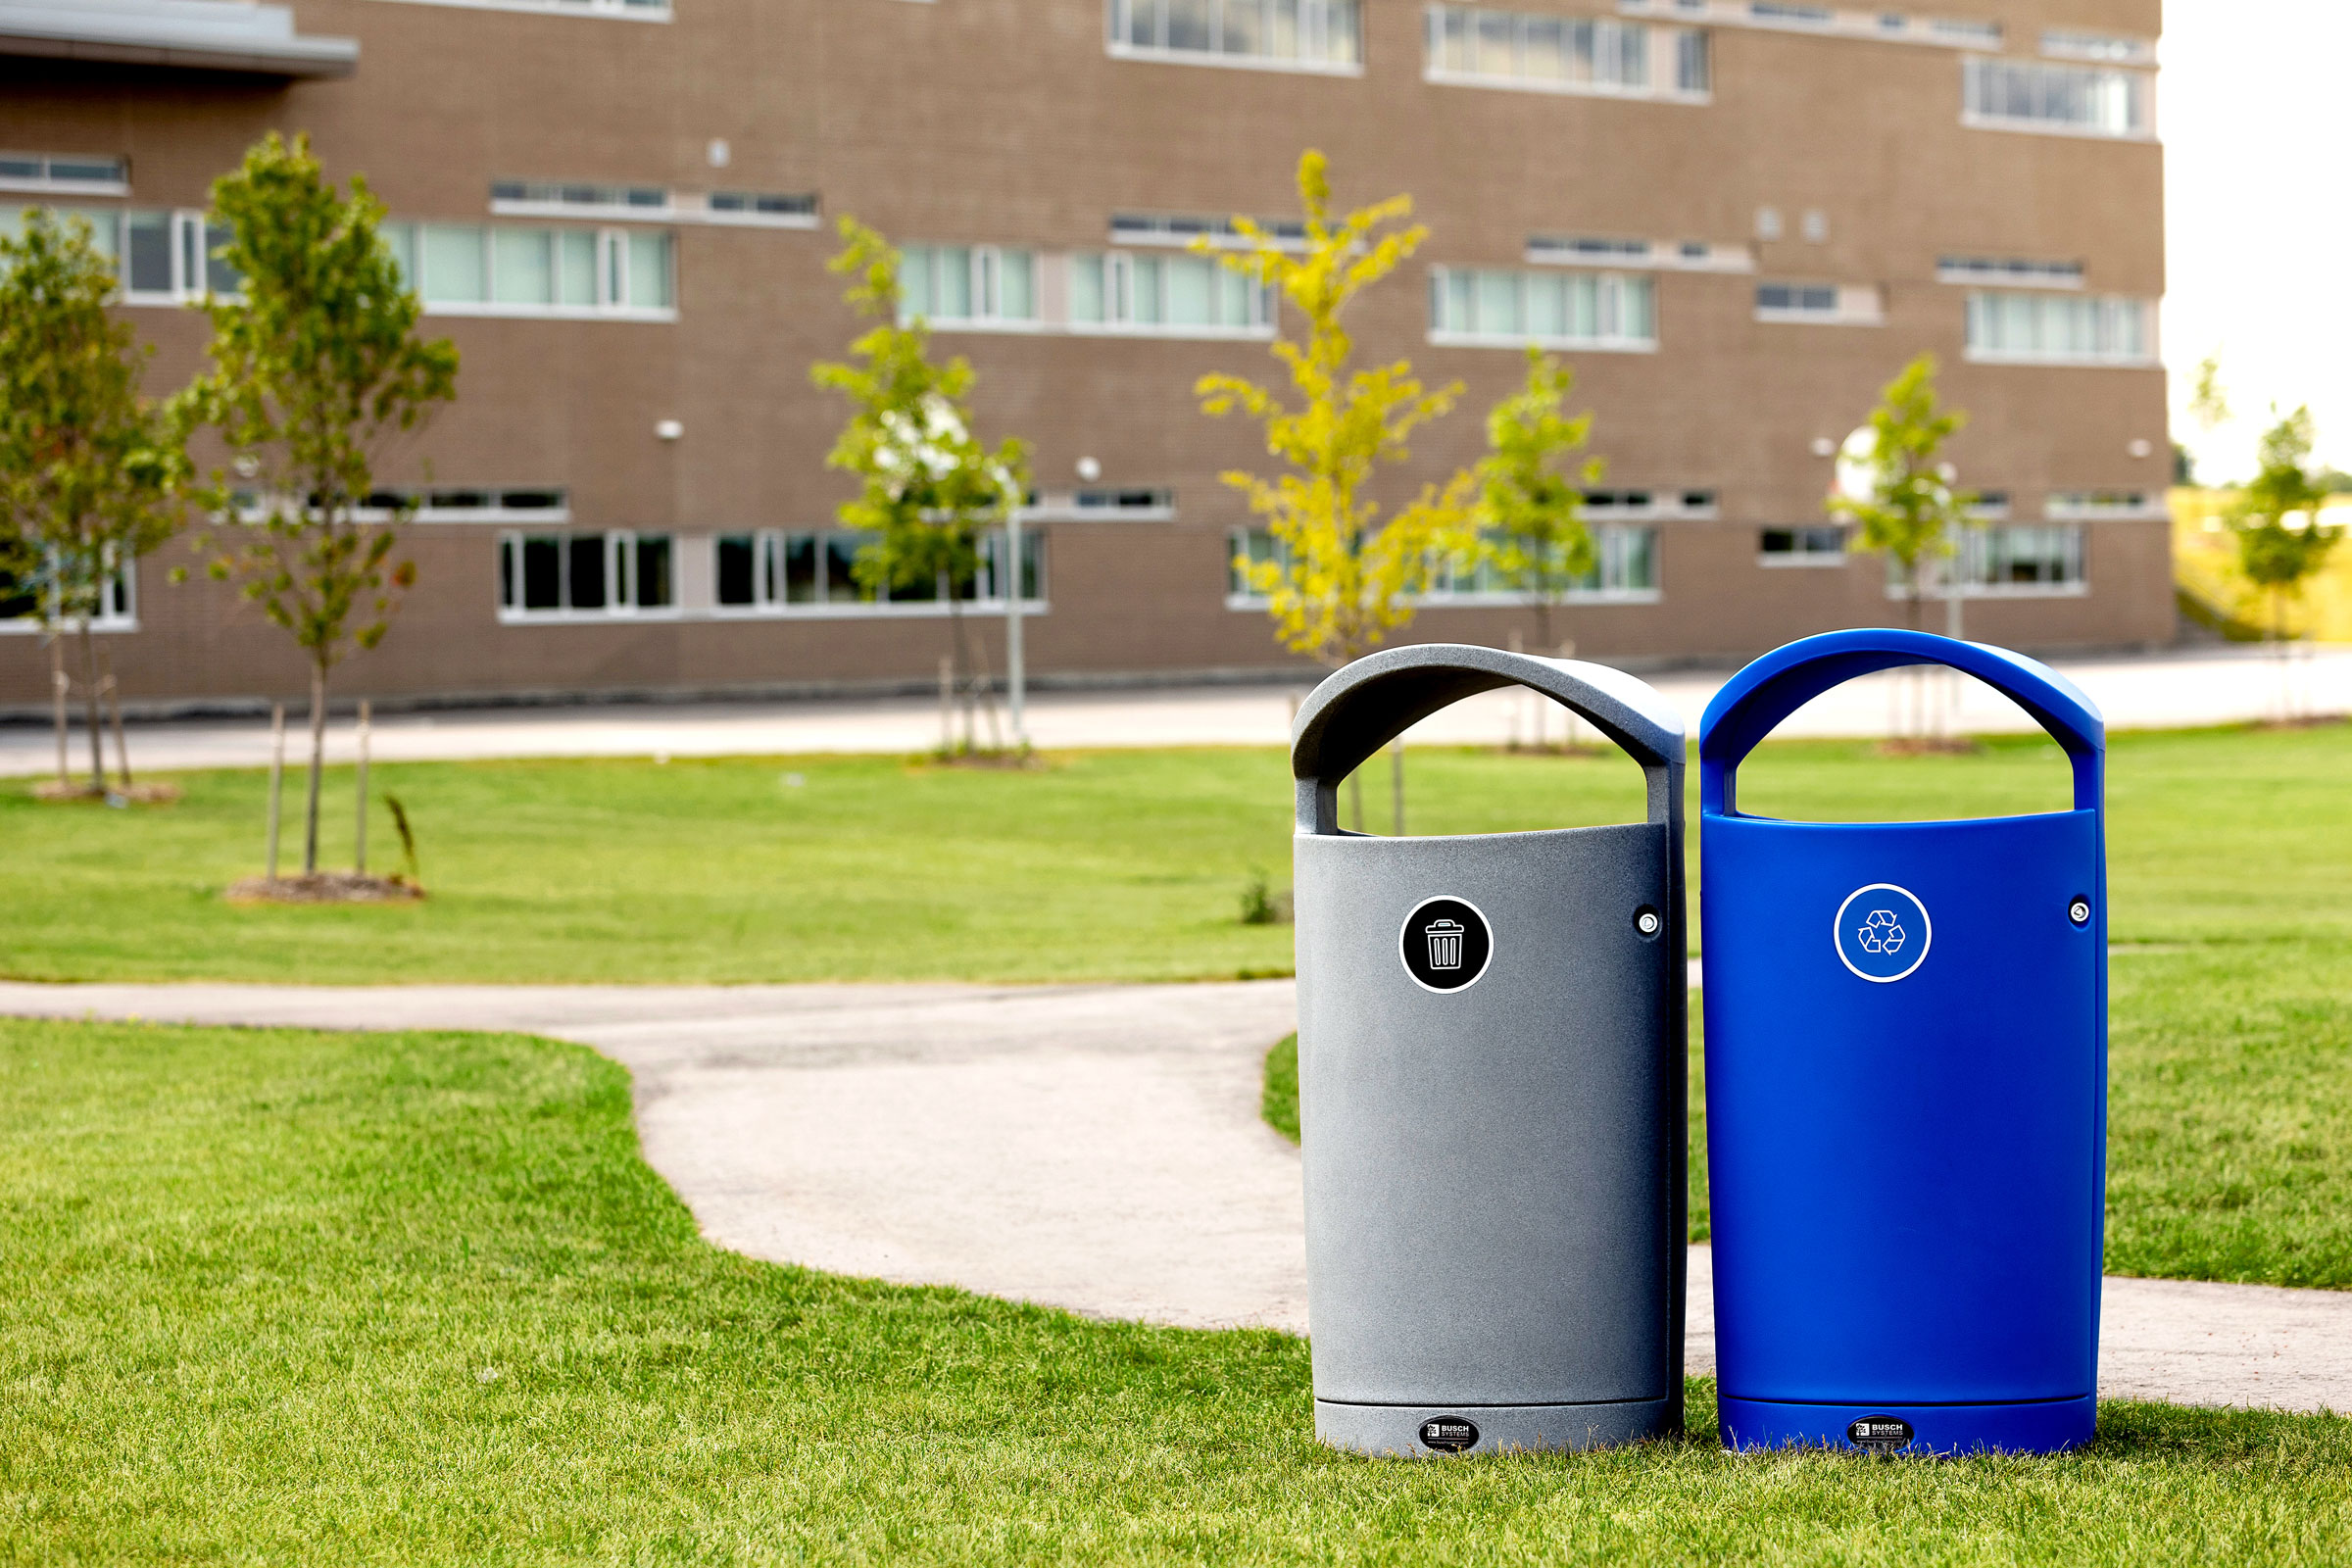 Creating Healthy Spaces with Successful Recycling Systems